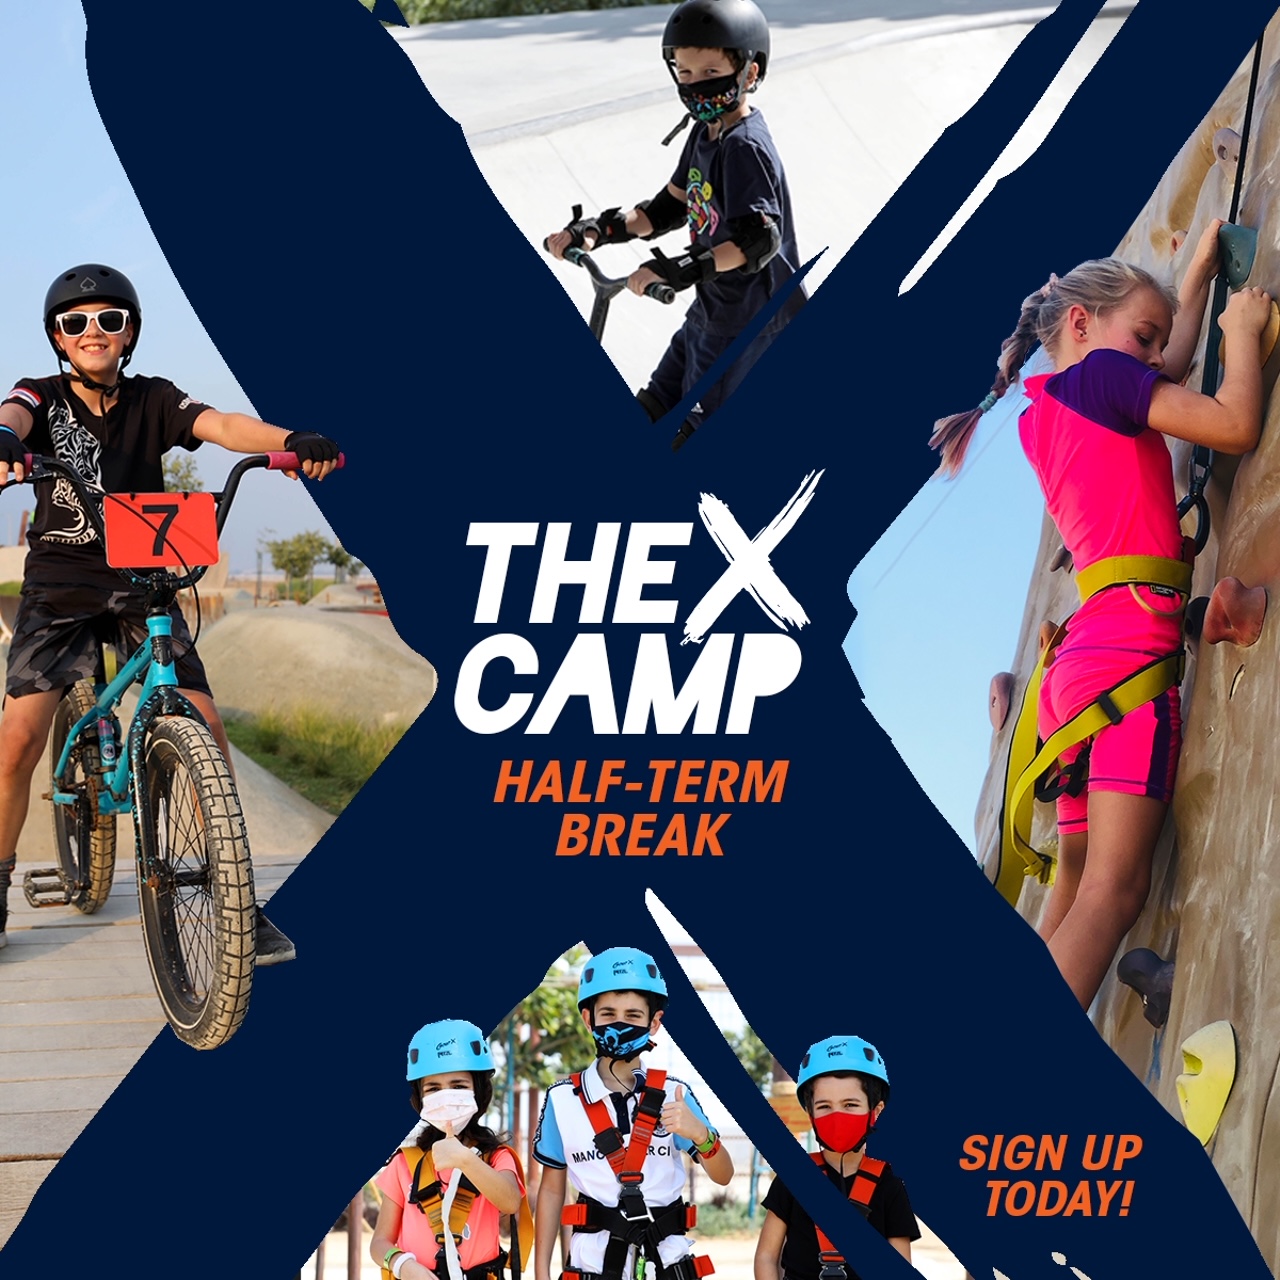 Let Your Kids Enjoy The Great Outdoors With Circuit X’s Half-Term Camp